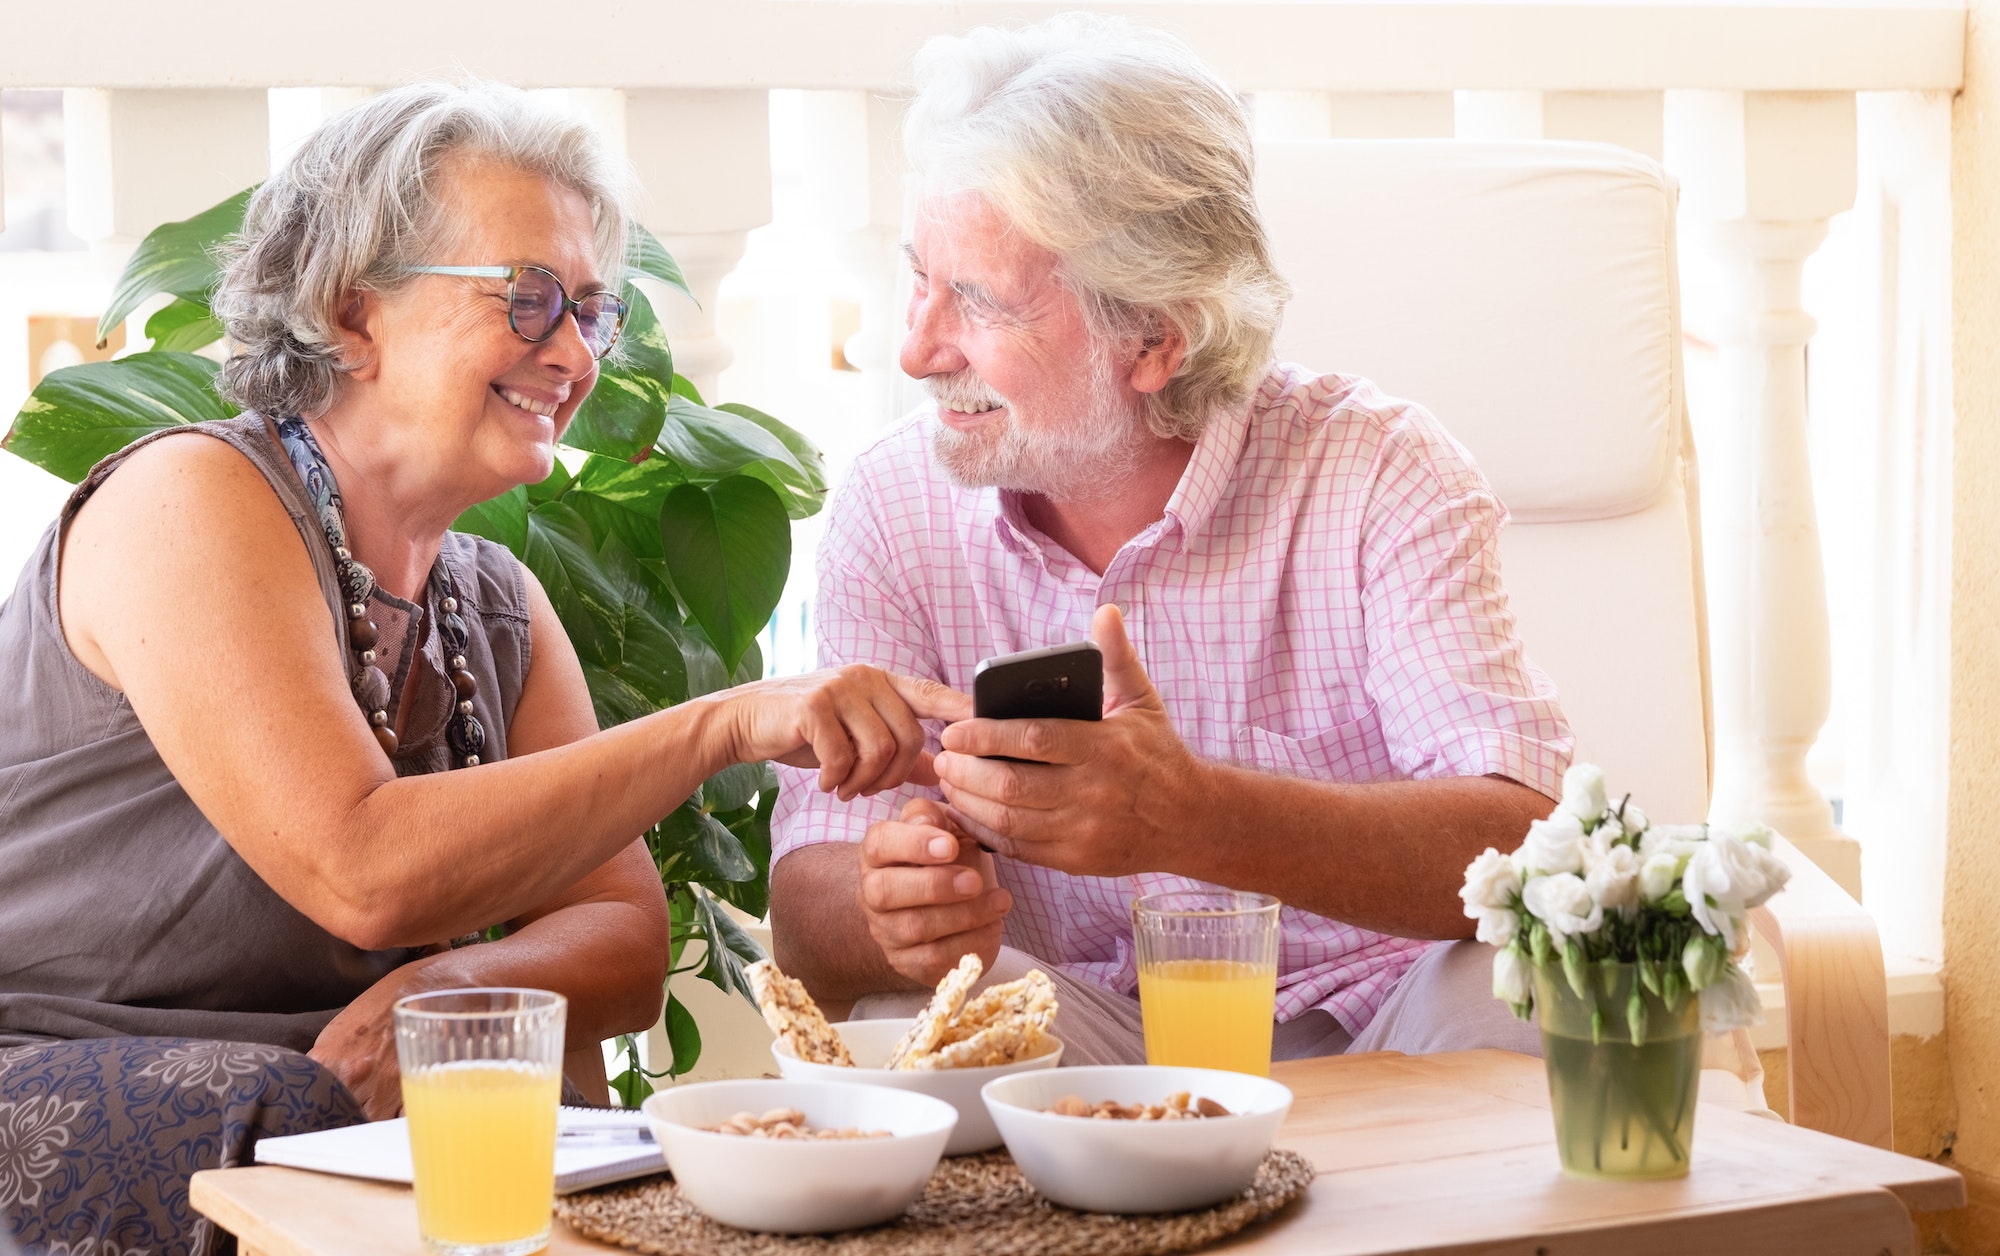 Two senior people pensioners with white and gray hair looking at the same cell phone enjoying snacks